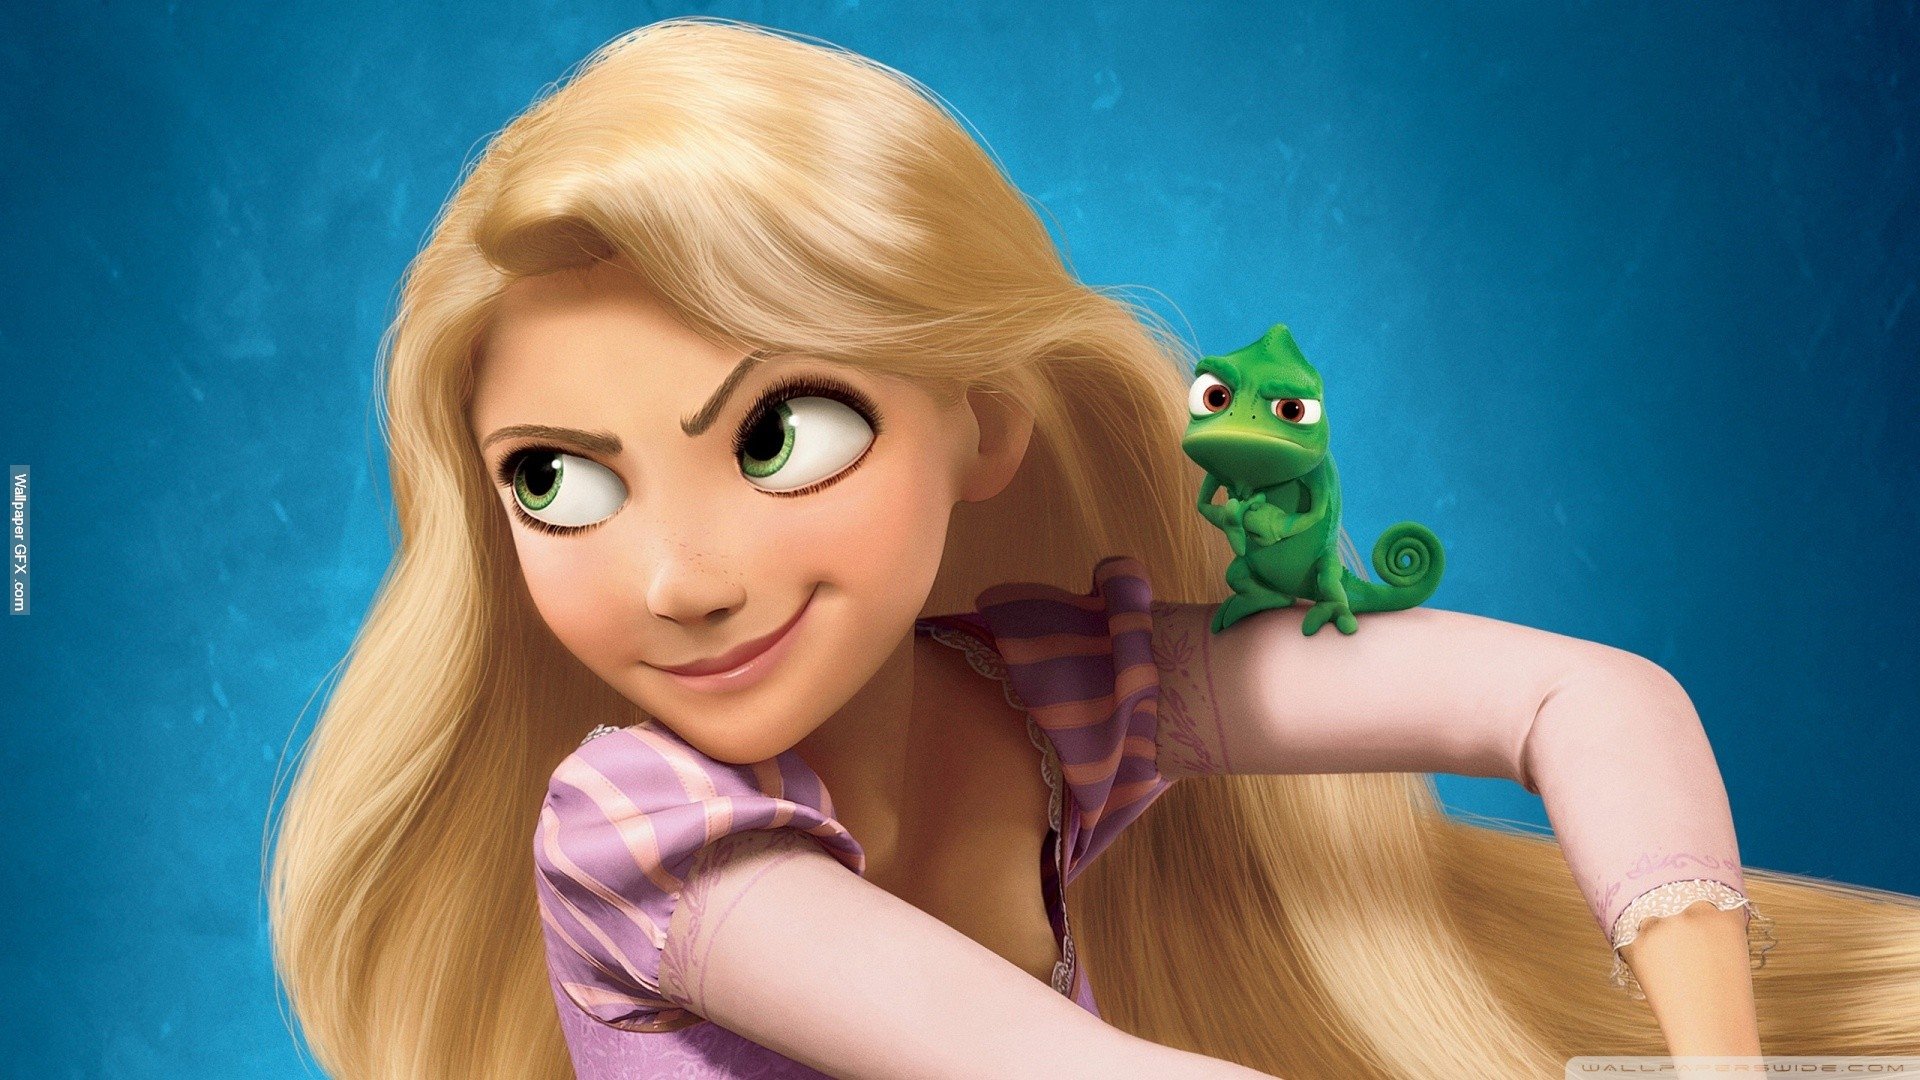 Tangled 4K wallpapers for your desktop or mobile screen free and easy to  download